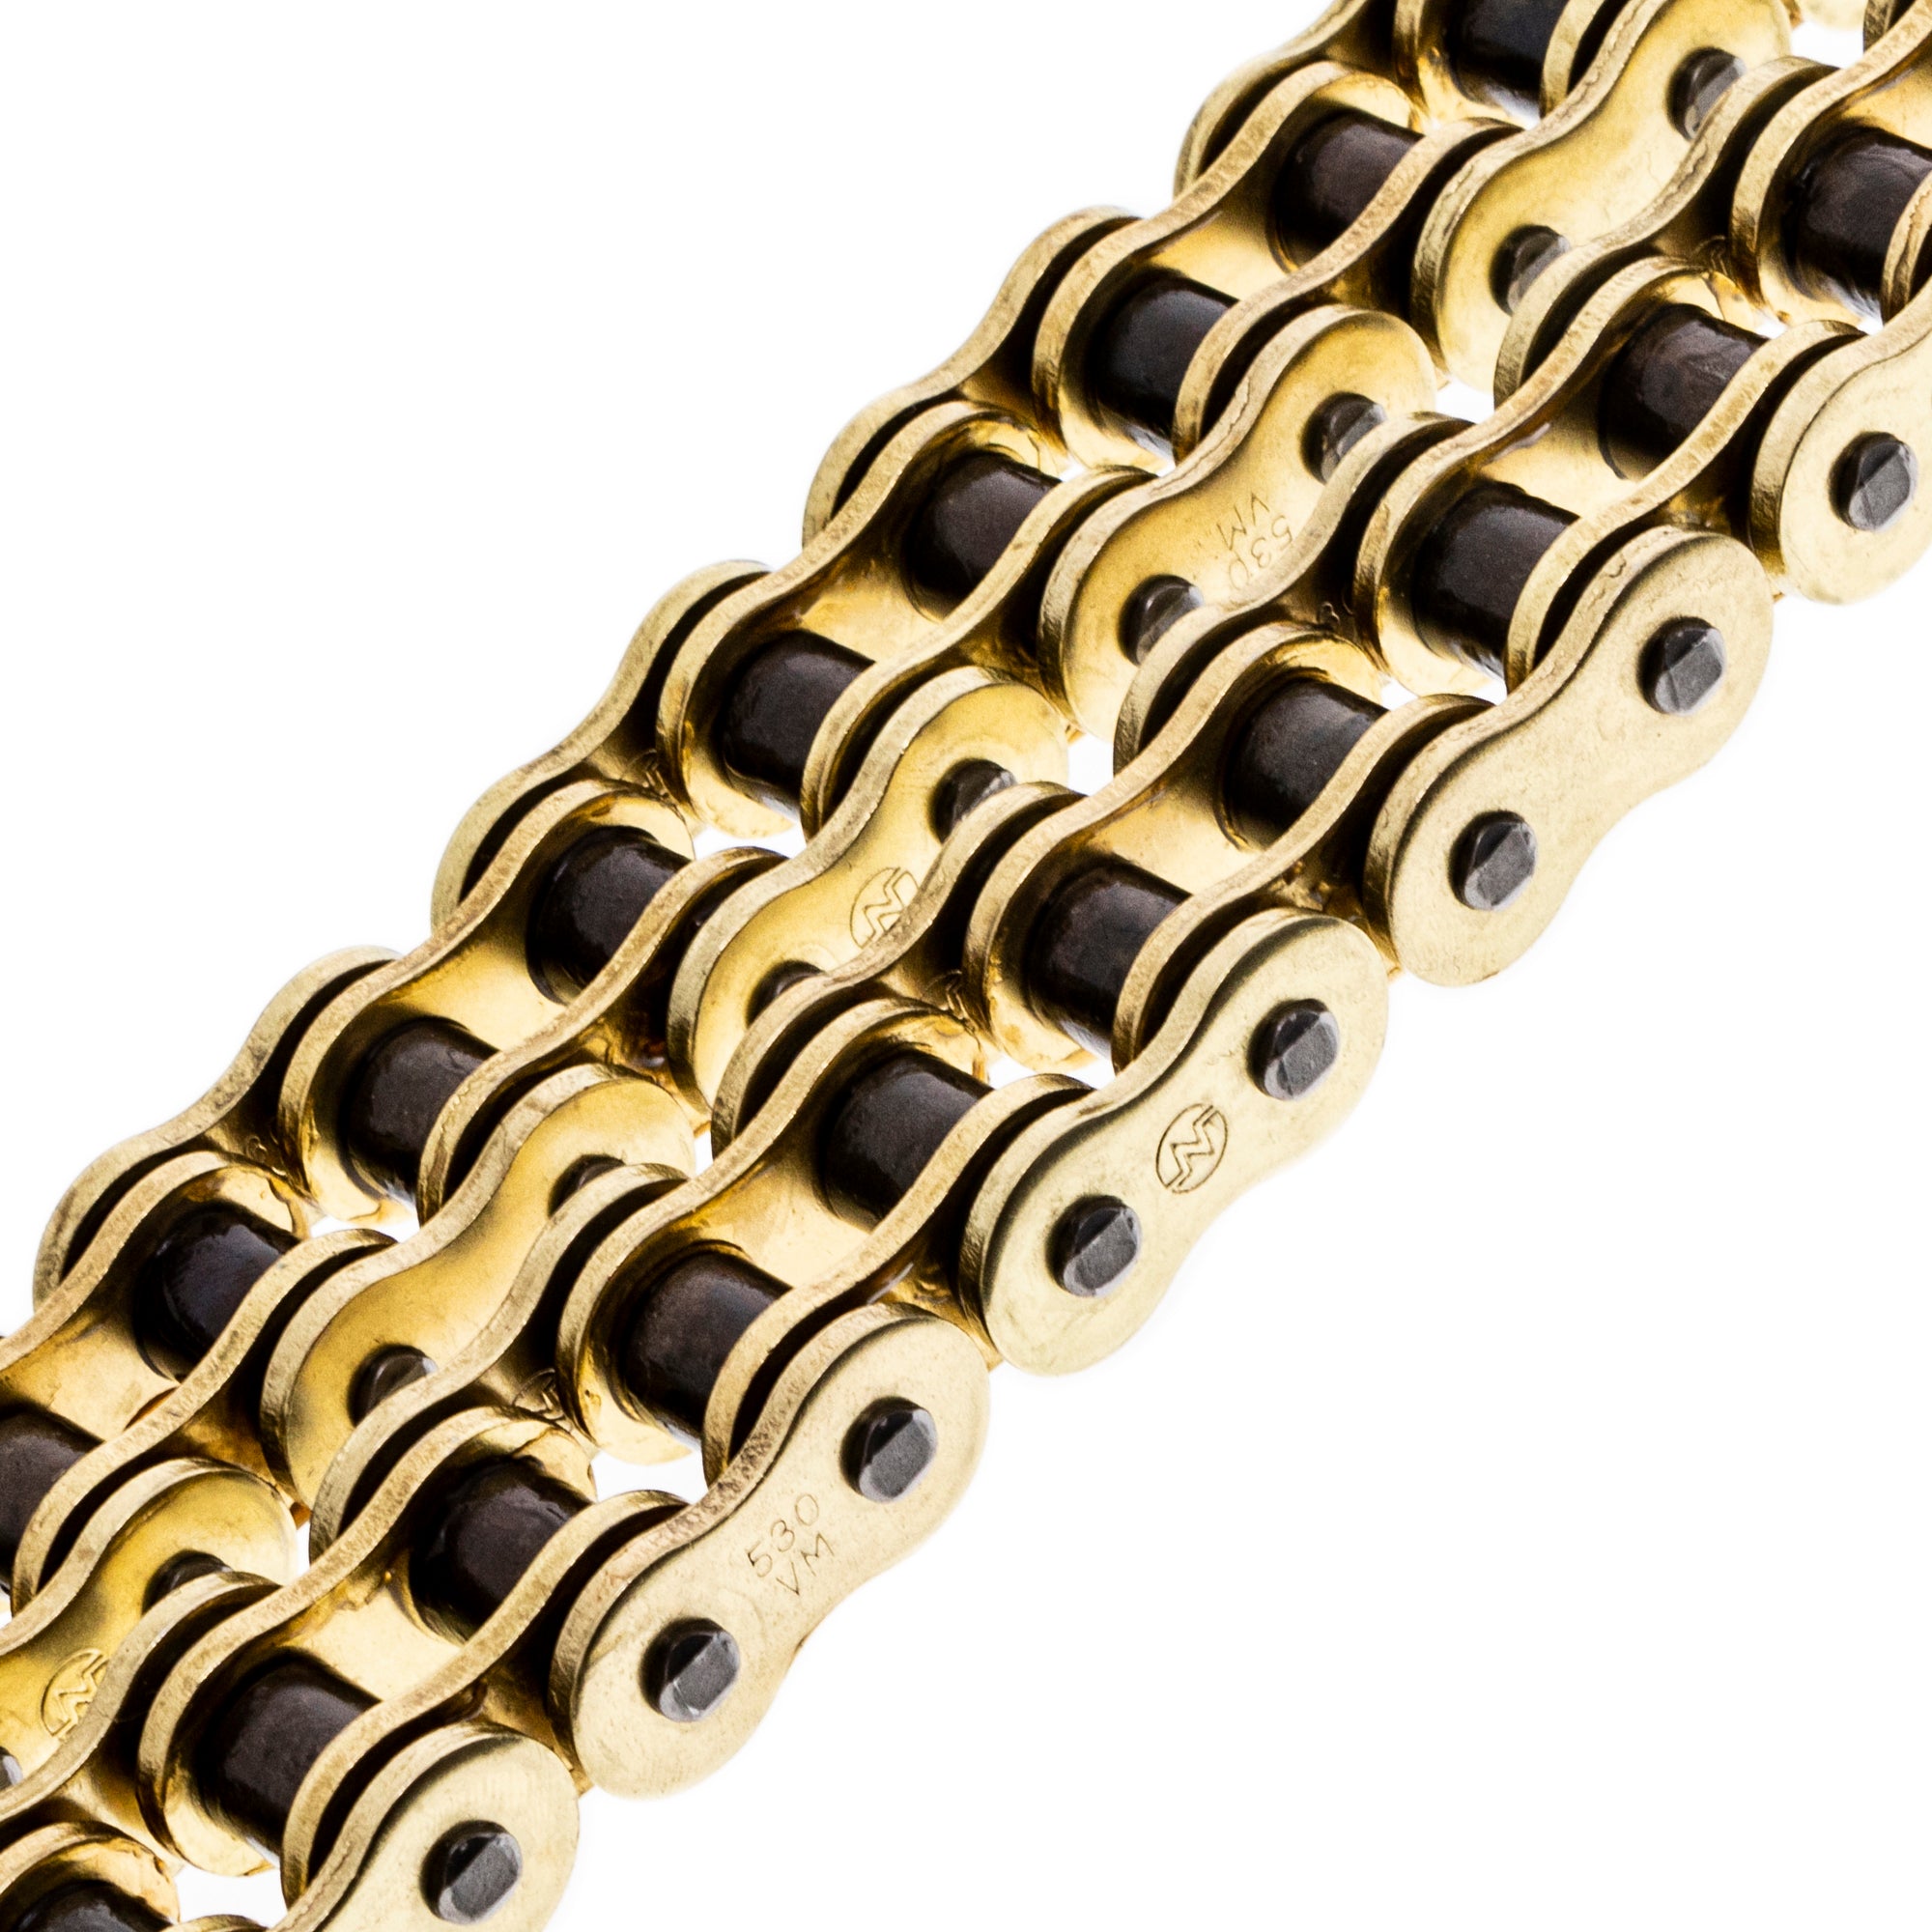 Gold X-Ring Chain 106 w/ Master Link for zOTHER Yamaha Triumph YZF750R XS500 Super Speed NICHE 519-CDC2572H